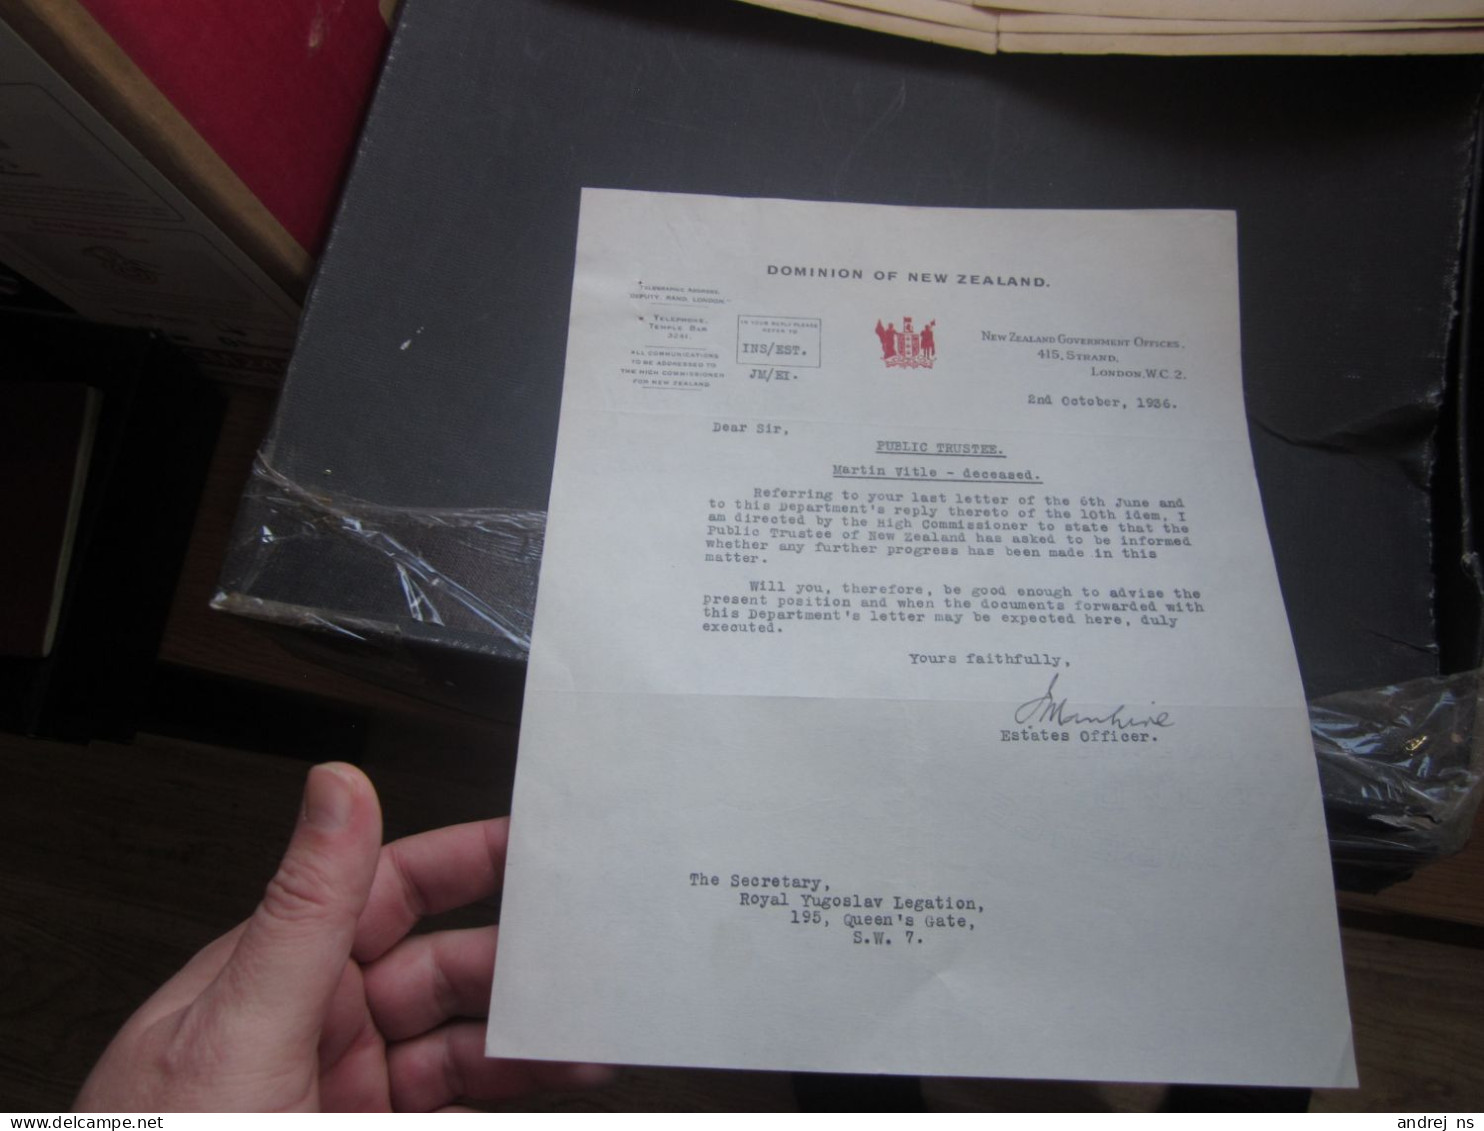 Dominion Of New Zealand 1936 Estates Officer Signatures  New Zealand Governments Offices London - Ver. Königreich